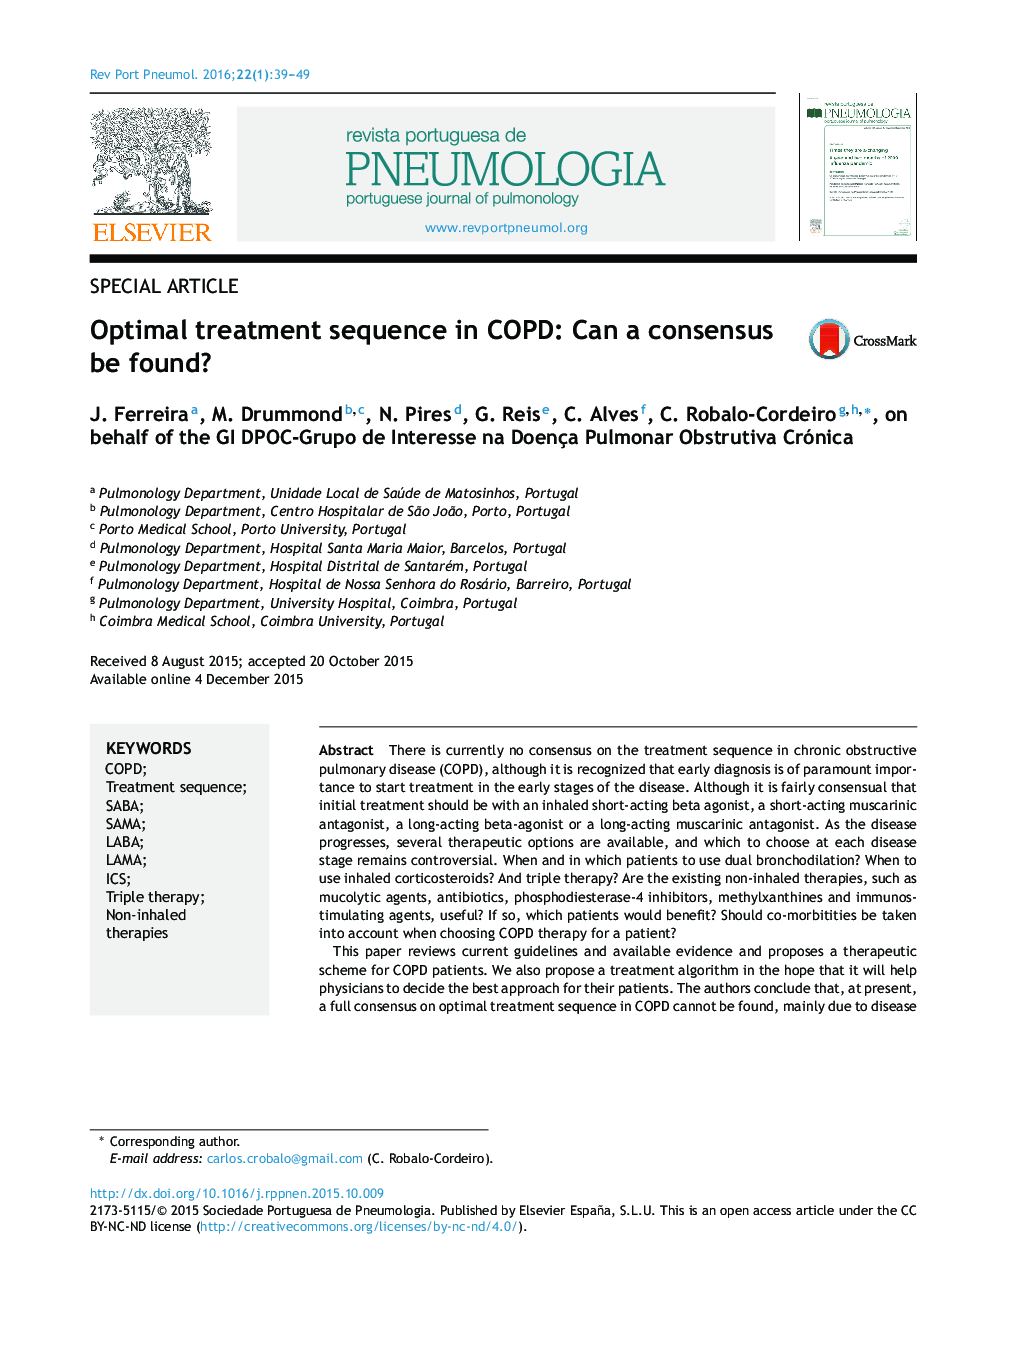 Optimal treatment sequence in COPD: Can a consensus be found?